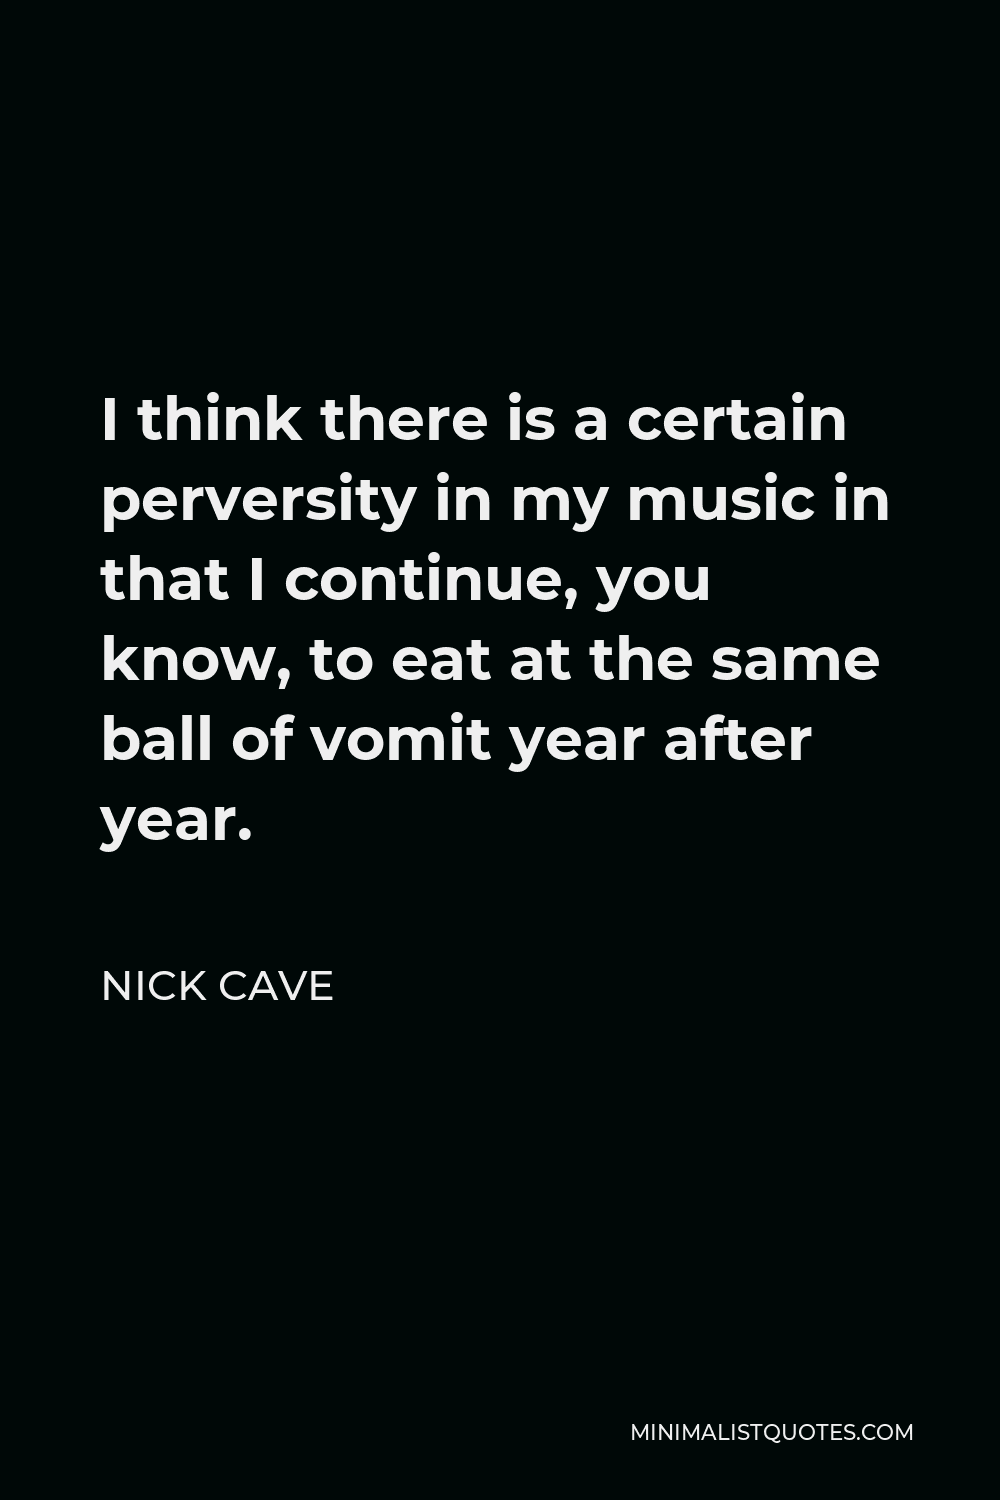 Nick Cave Quote - I think there is a certain perversity in my music in that I continue, you know, to eat at the same ball of vomit year after year.